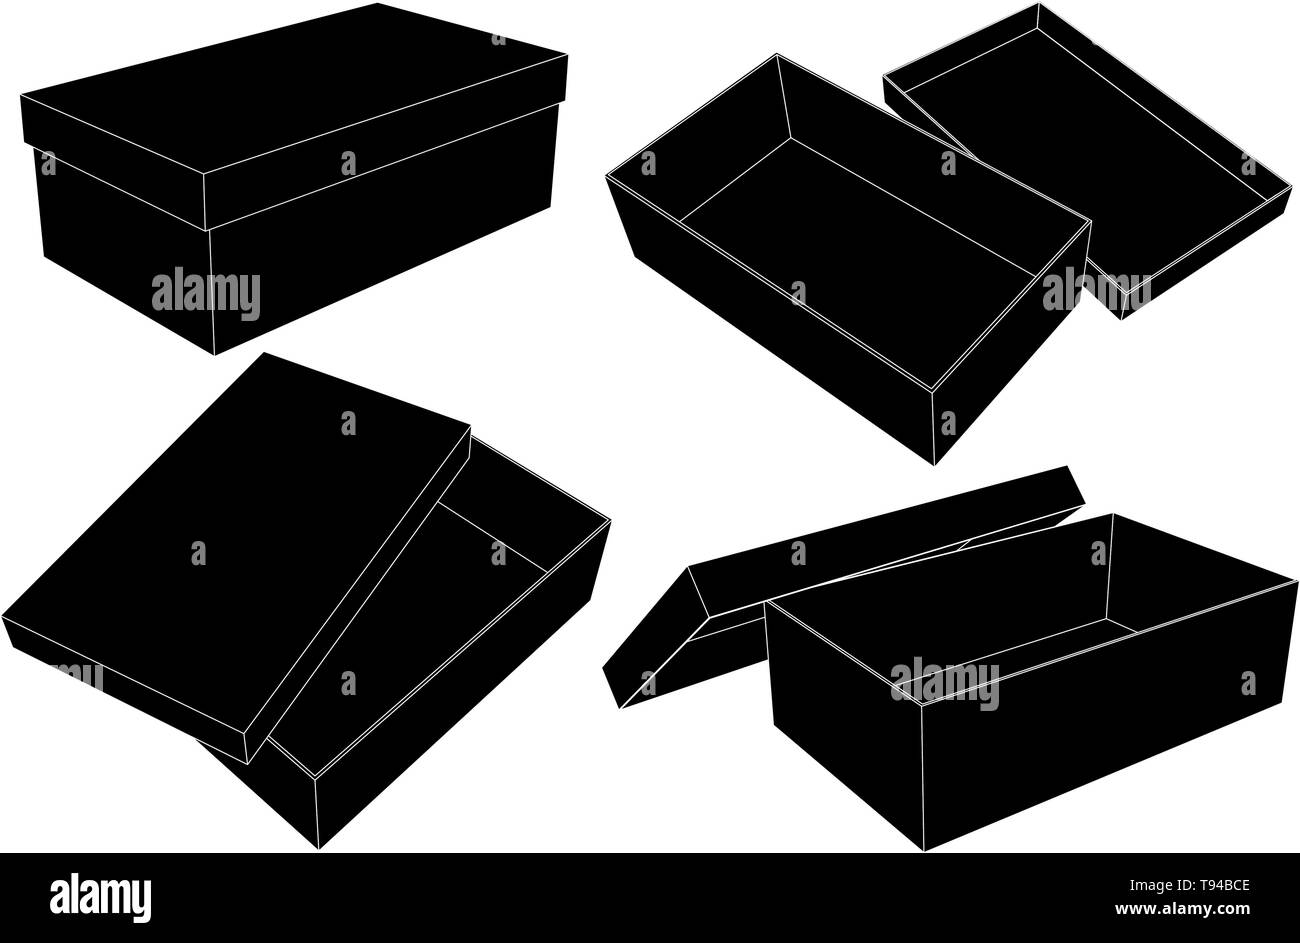 Open storage boxes. Black outline drawing Stock Vector